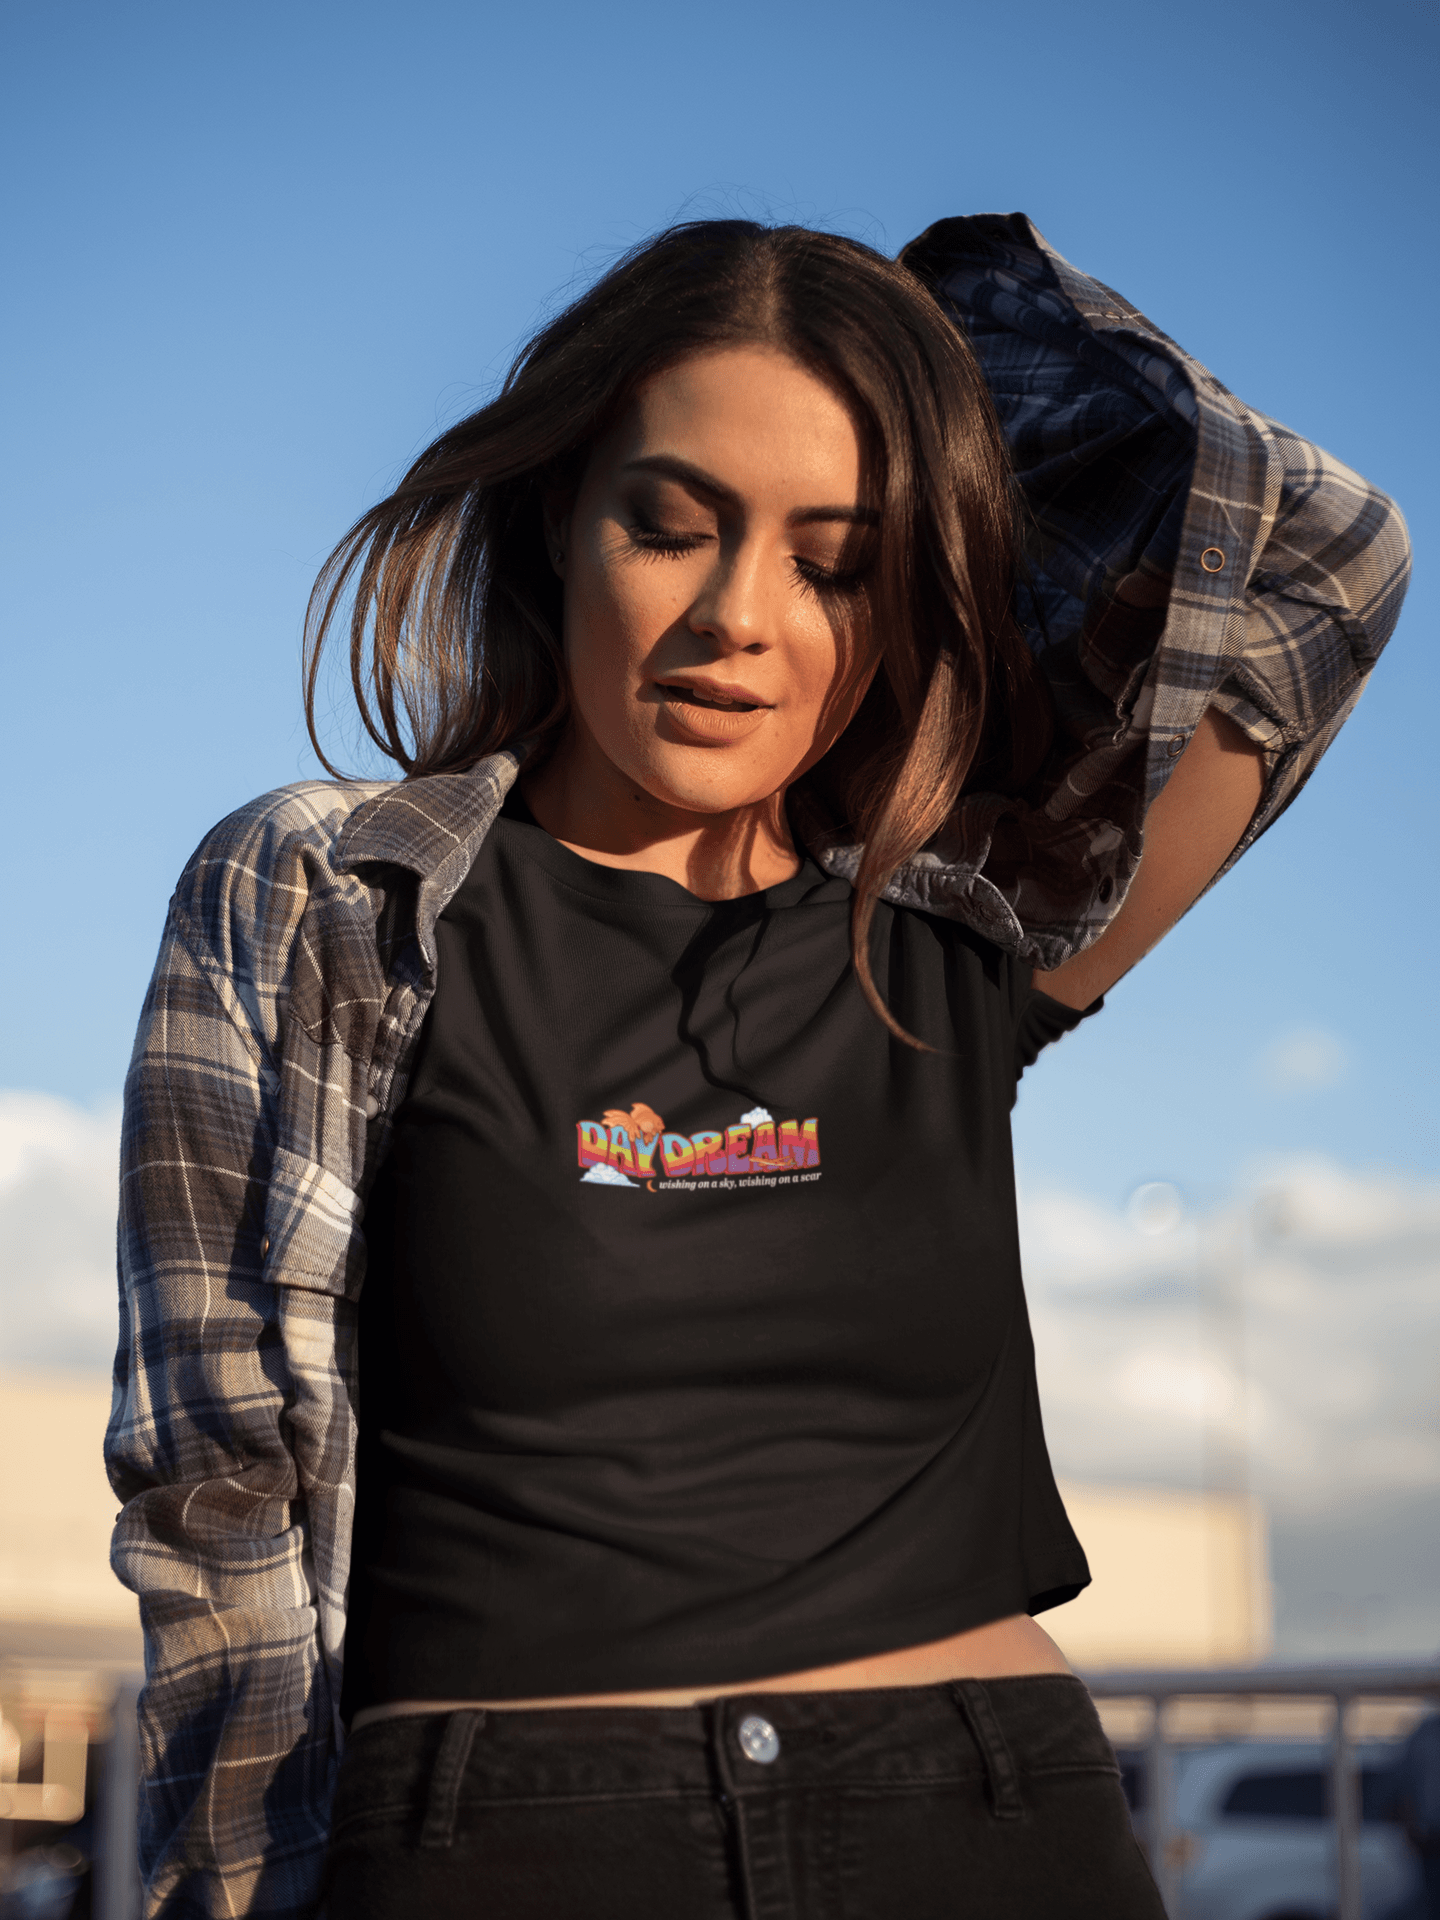 Daydream Crop Tops, Shirts, and Hoodies